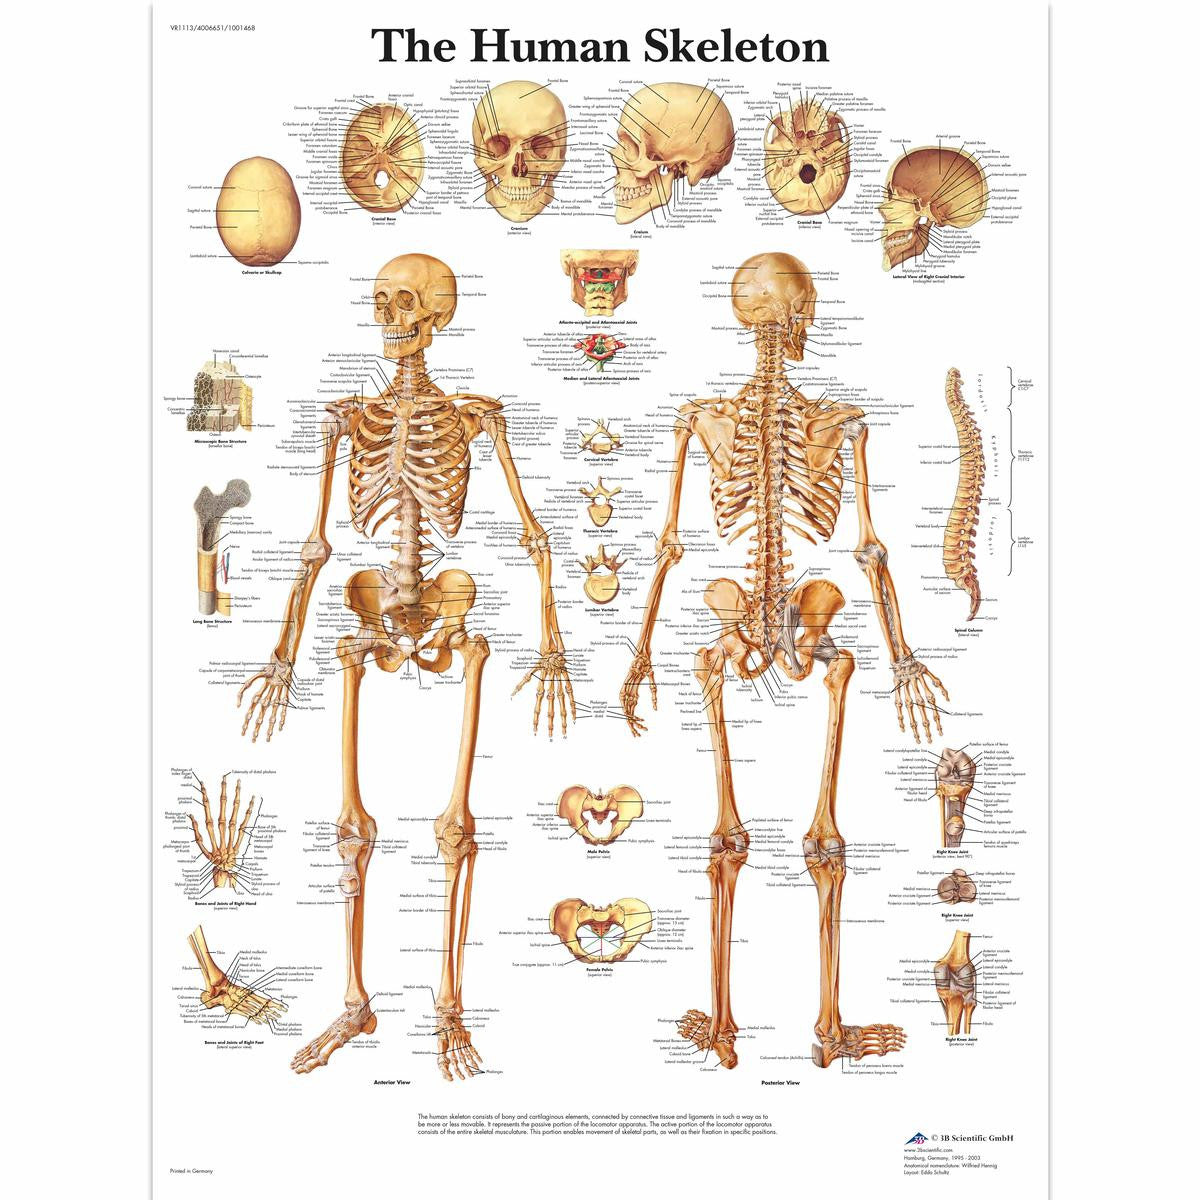 The Skeletal System chart